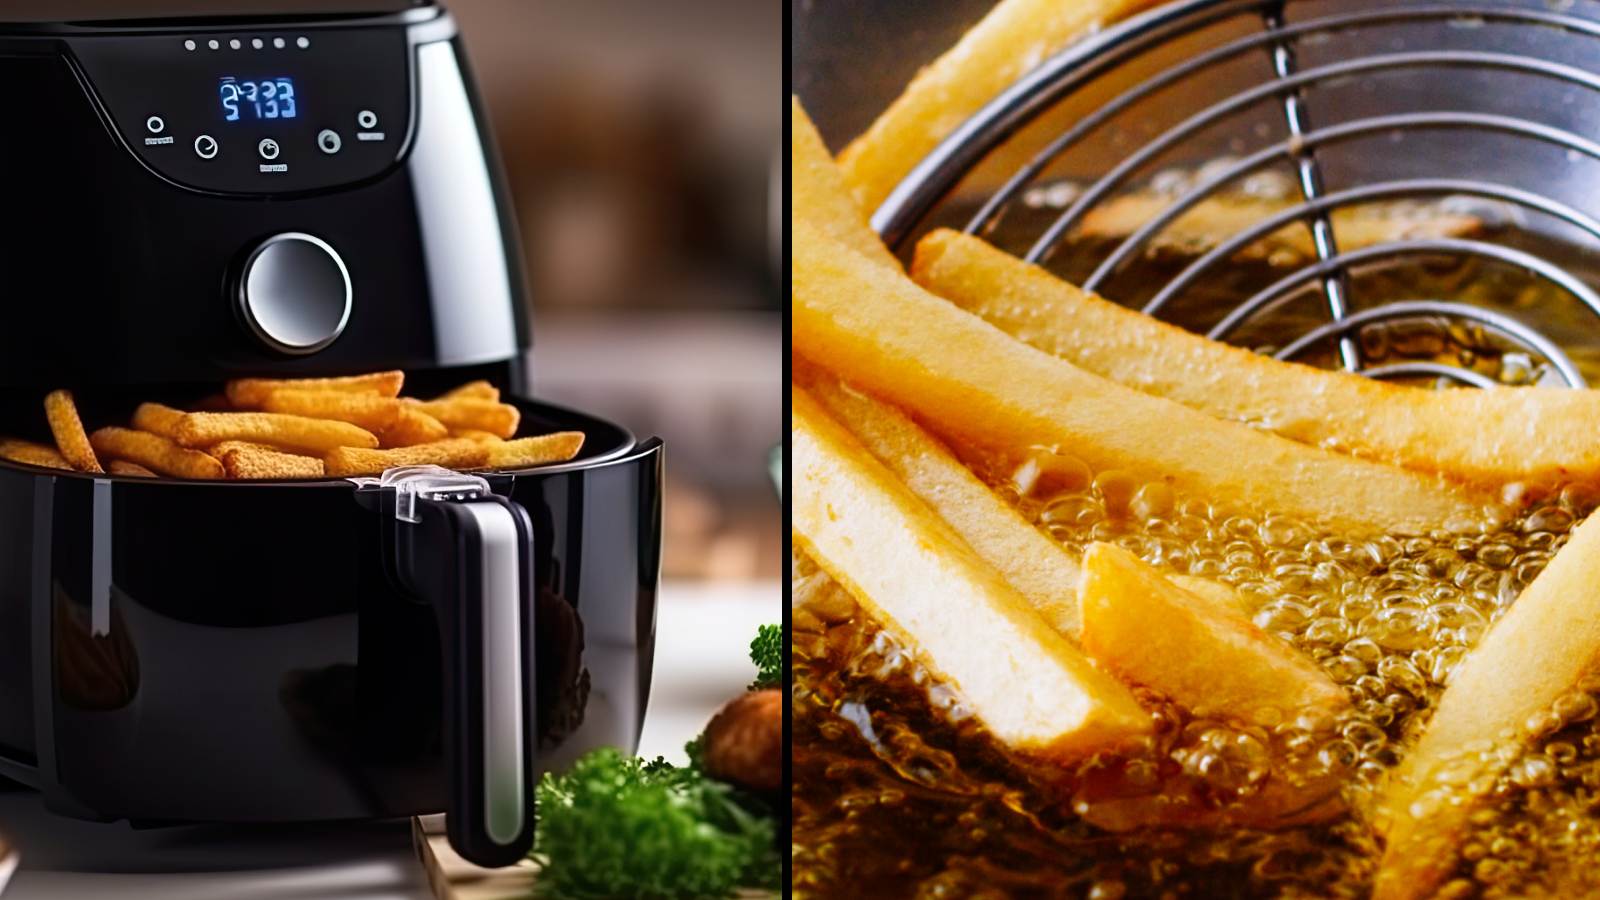 Frying vs air frying: Which cooking method is healthier for you?